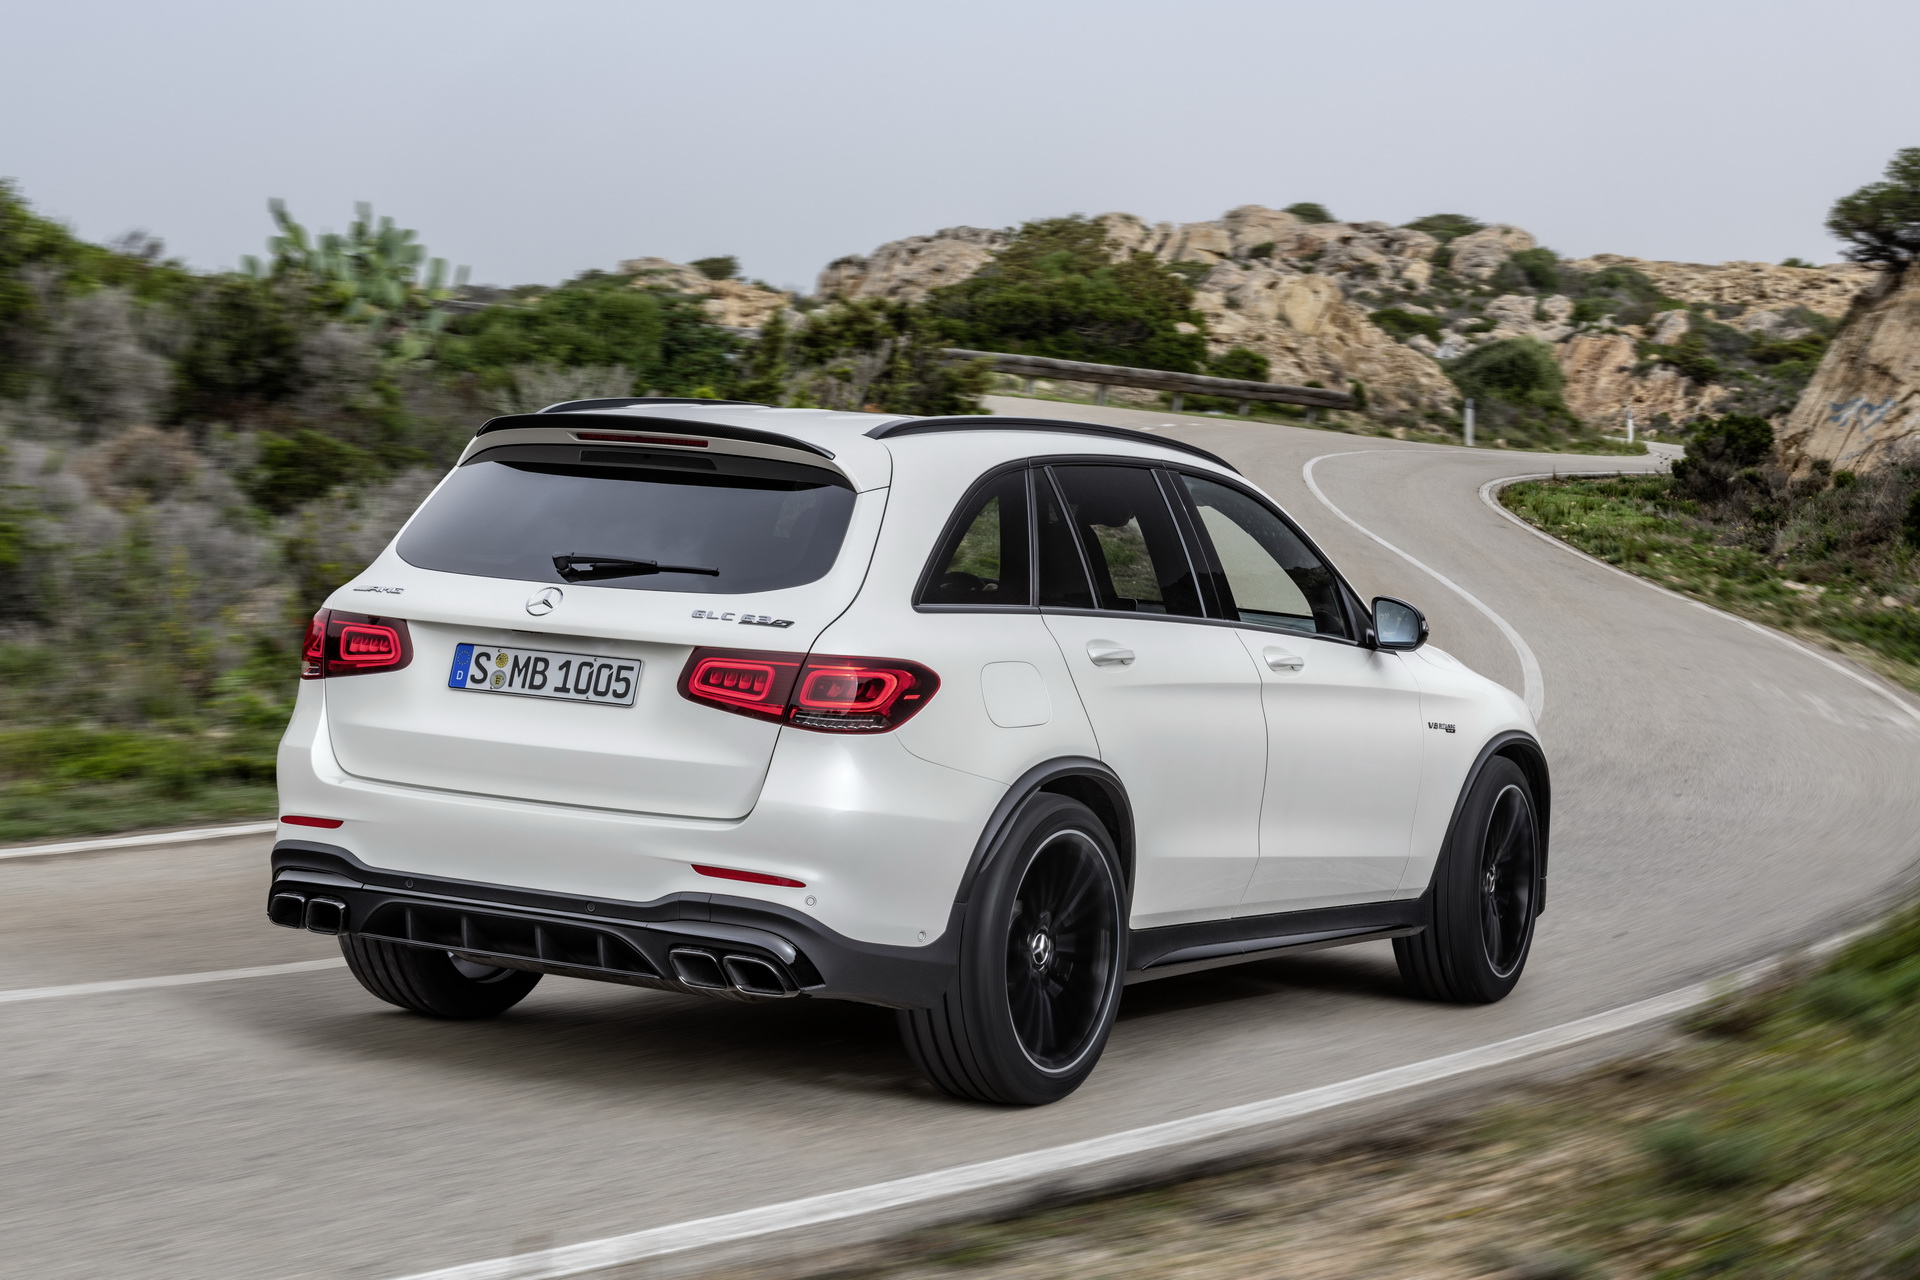 2020 Mercedes AMG GLC 63 Priced From £74,599 In The UK | Carscoops